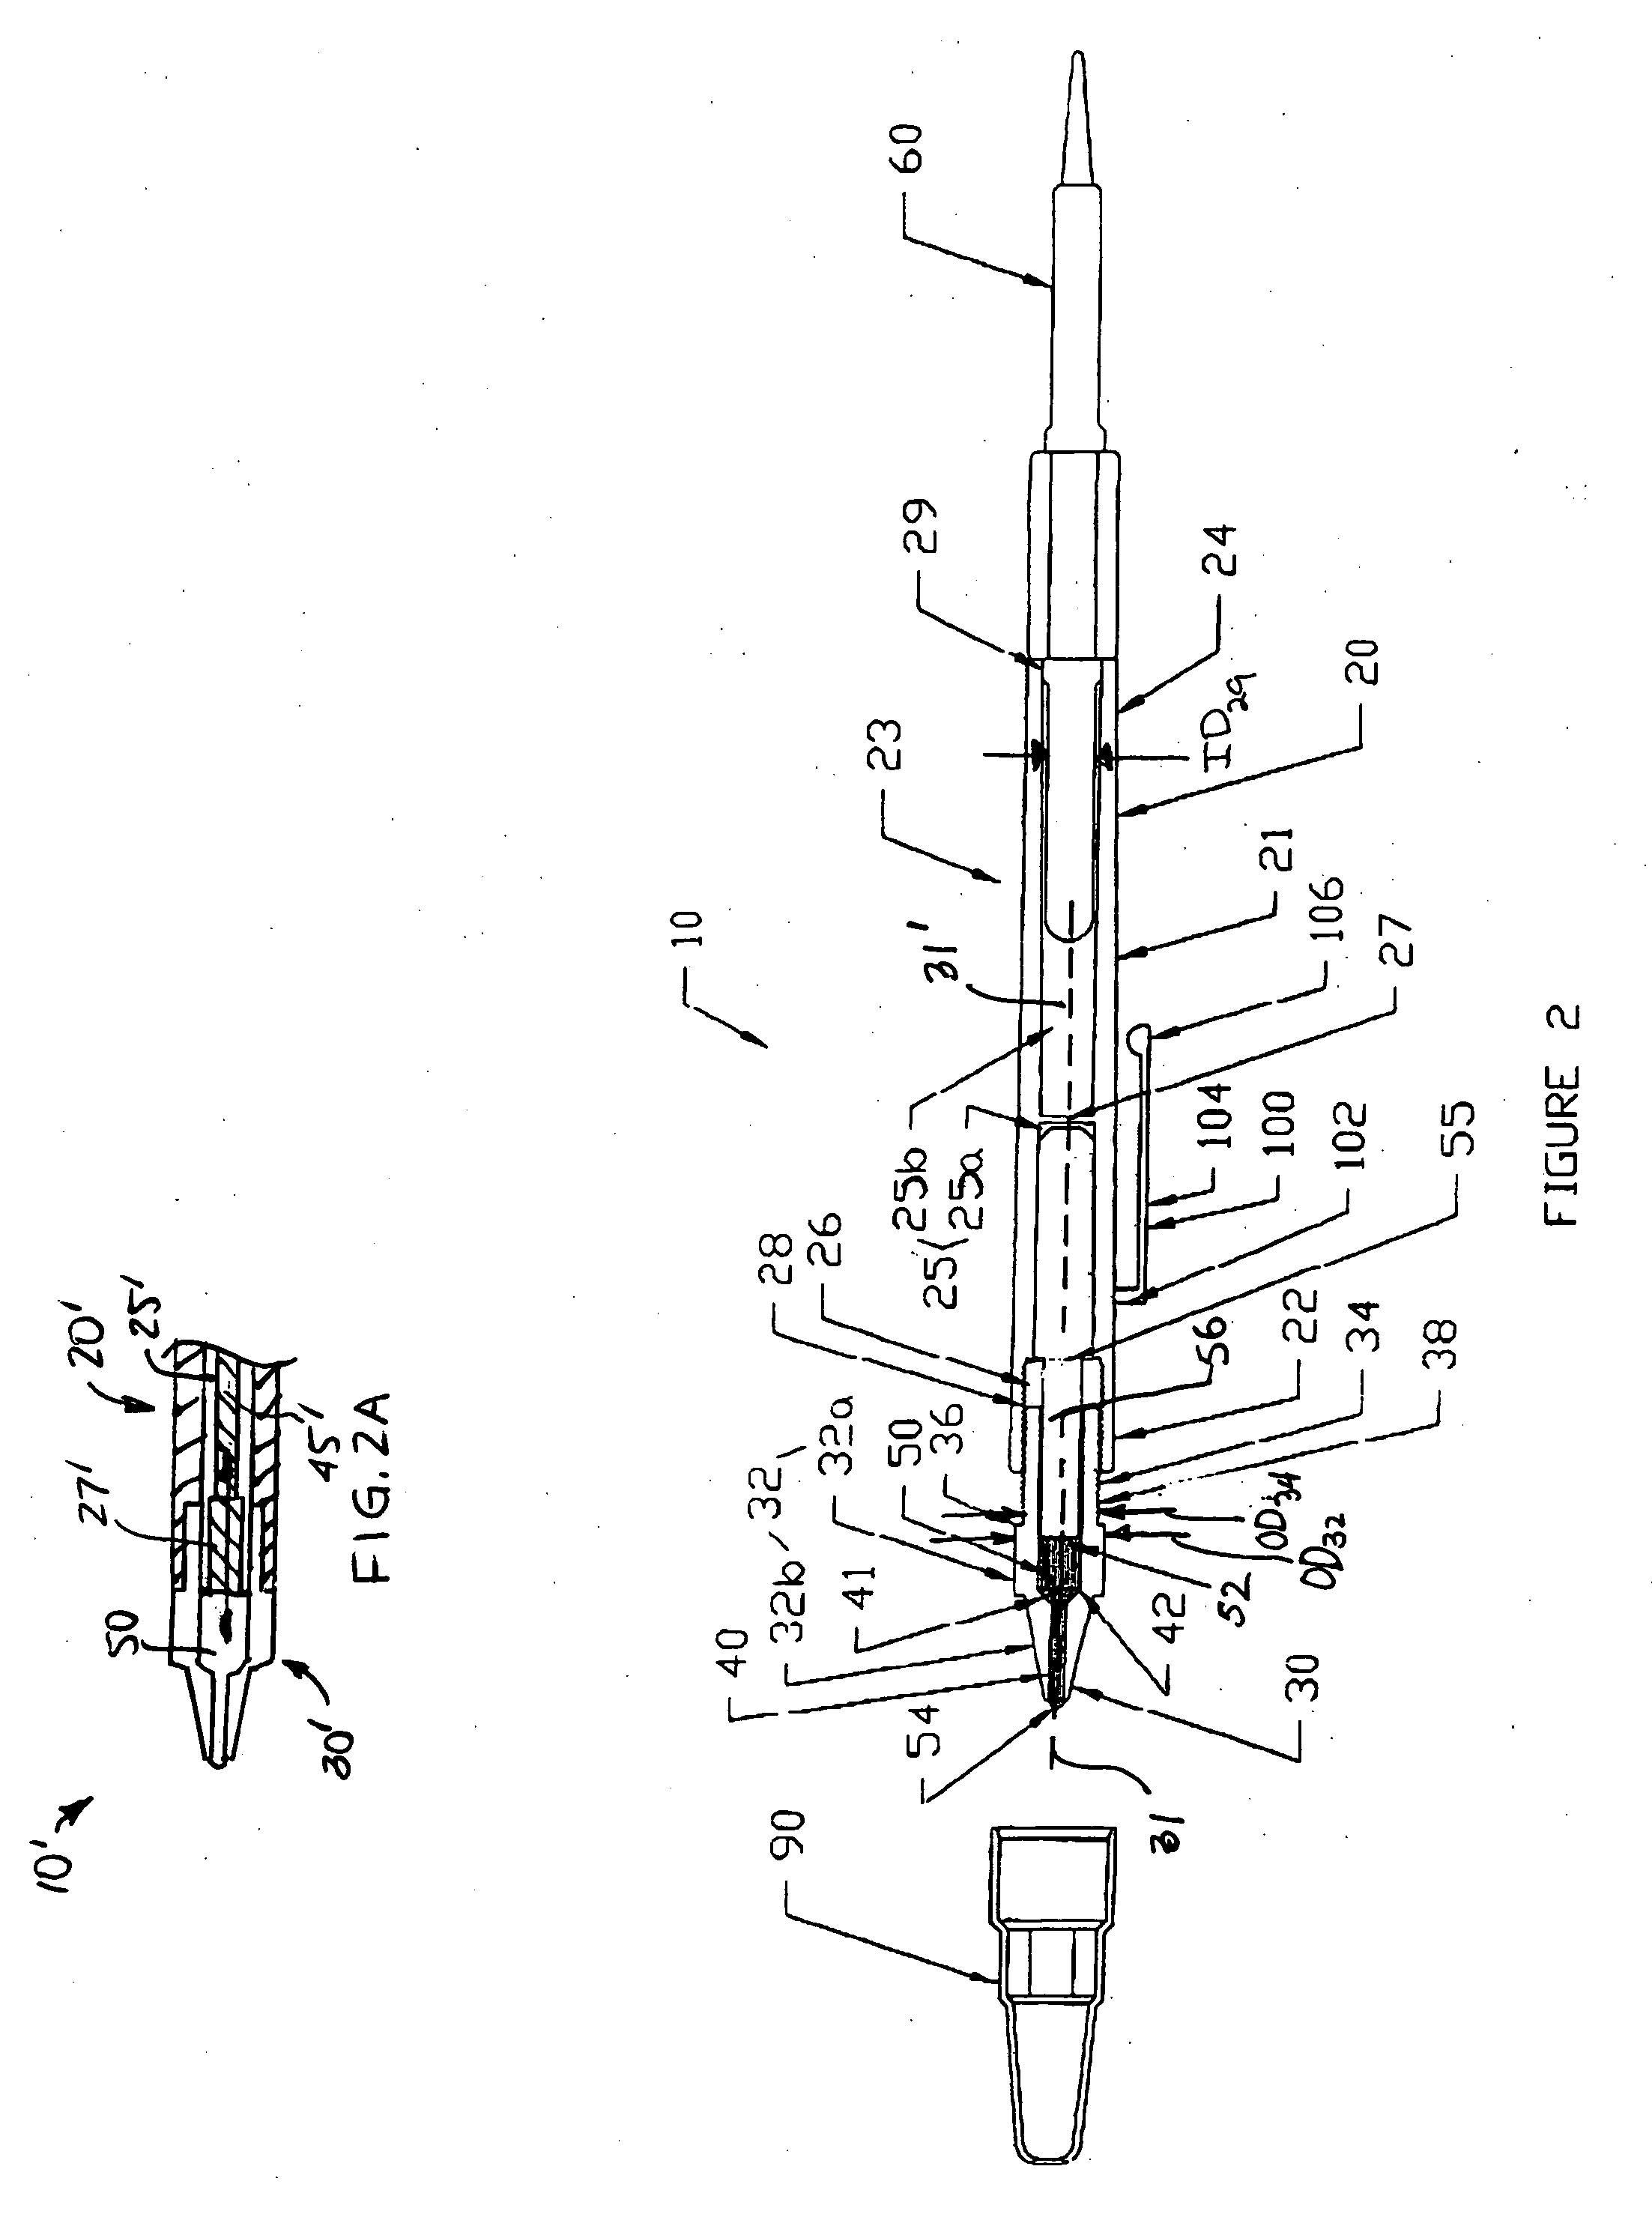 Hand-held pick-and-place apparatus with adhesive grasping element, components thereof, and associated methods